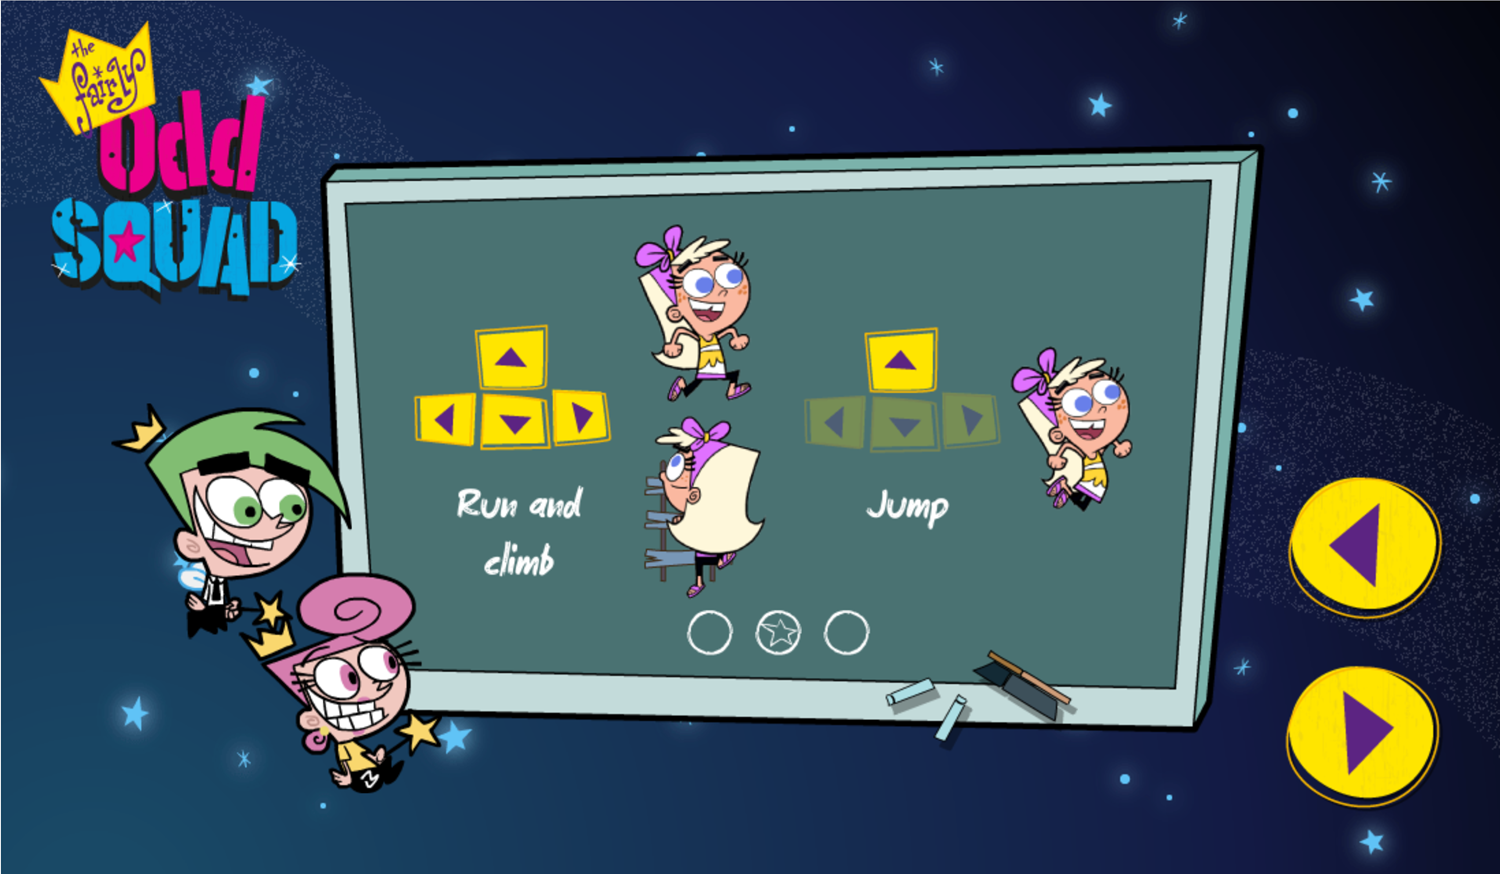 The Fairly OddParents The Fairly odd Squad Game How to Play Screen Screenshot.